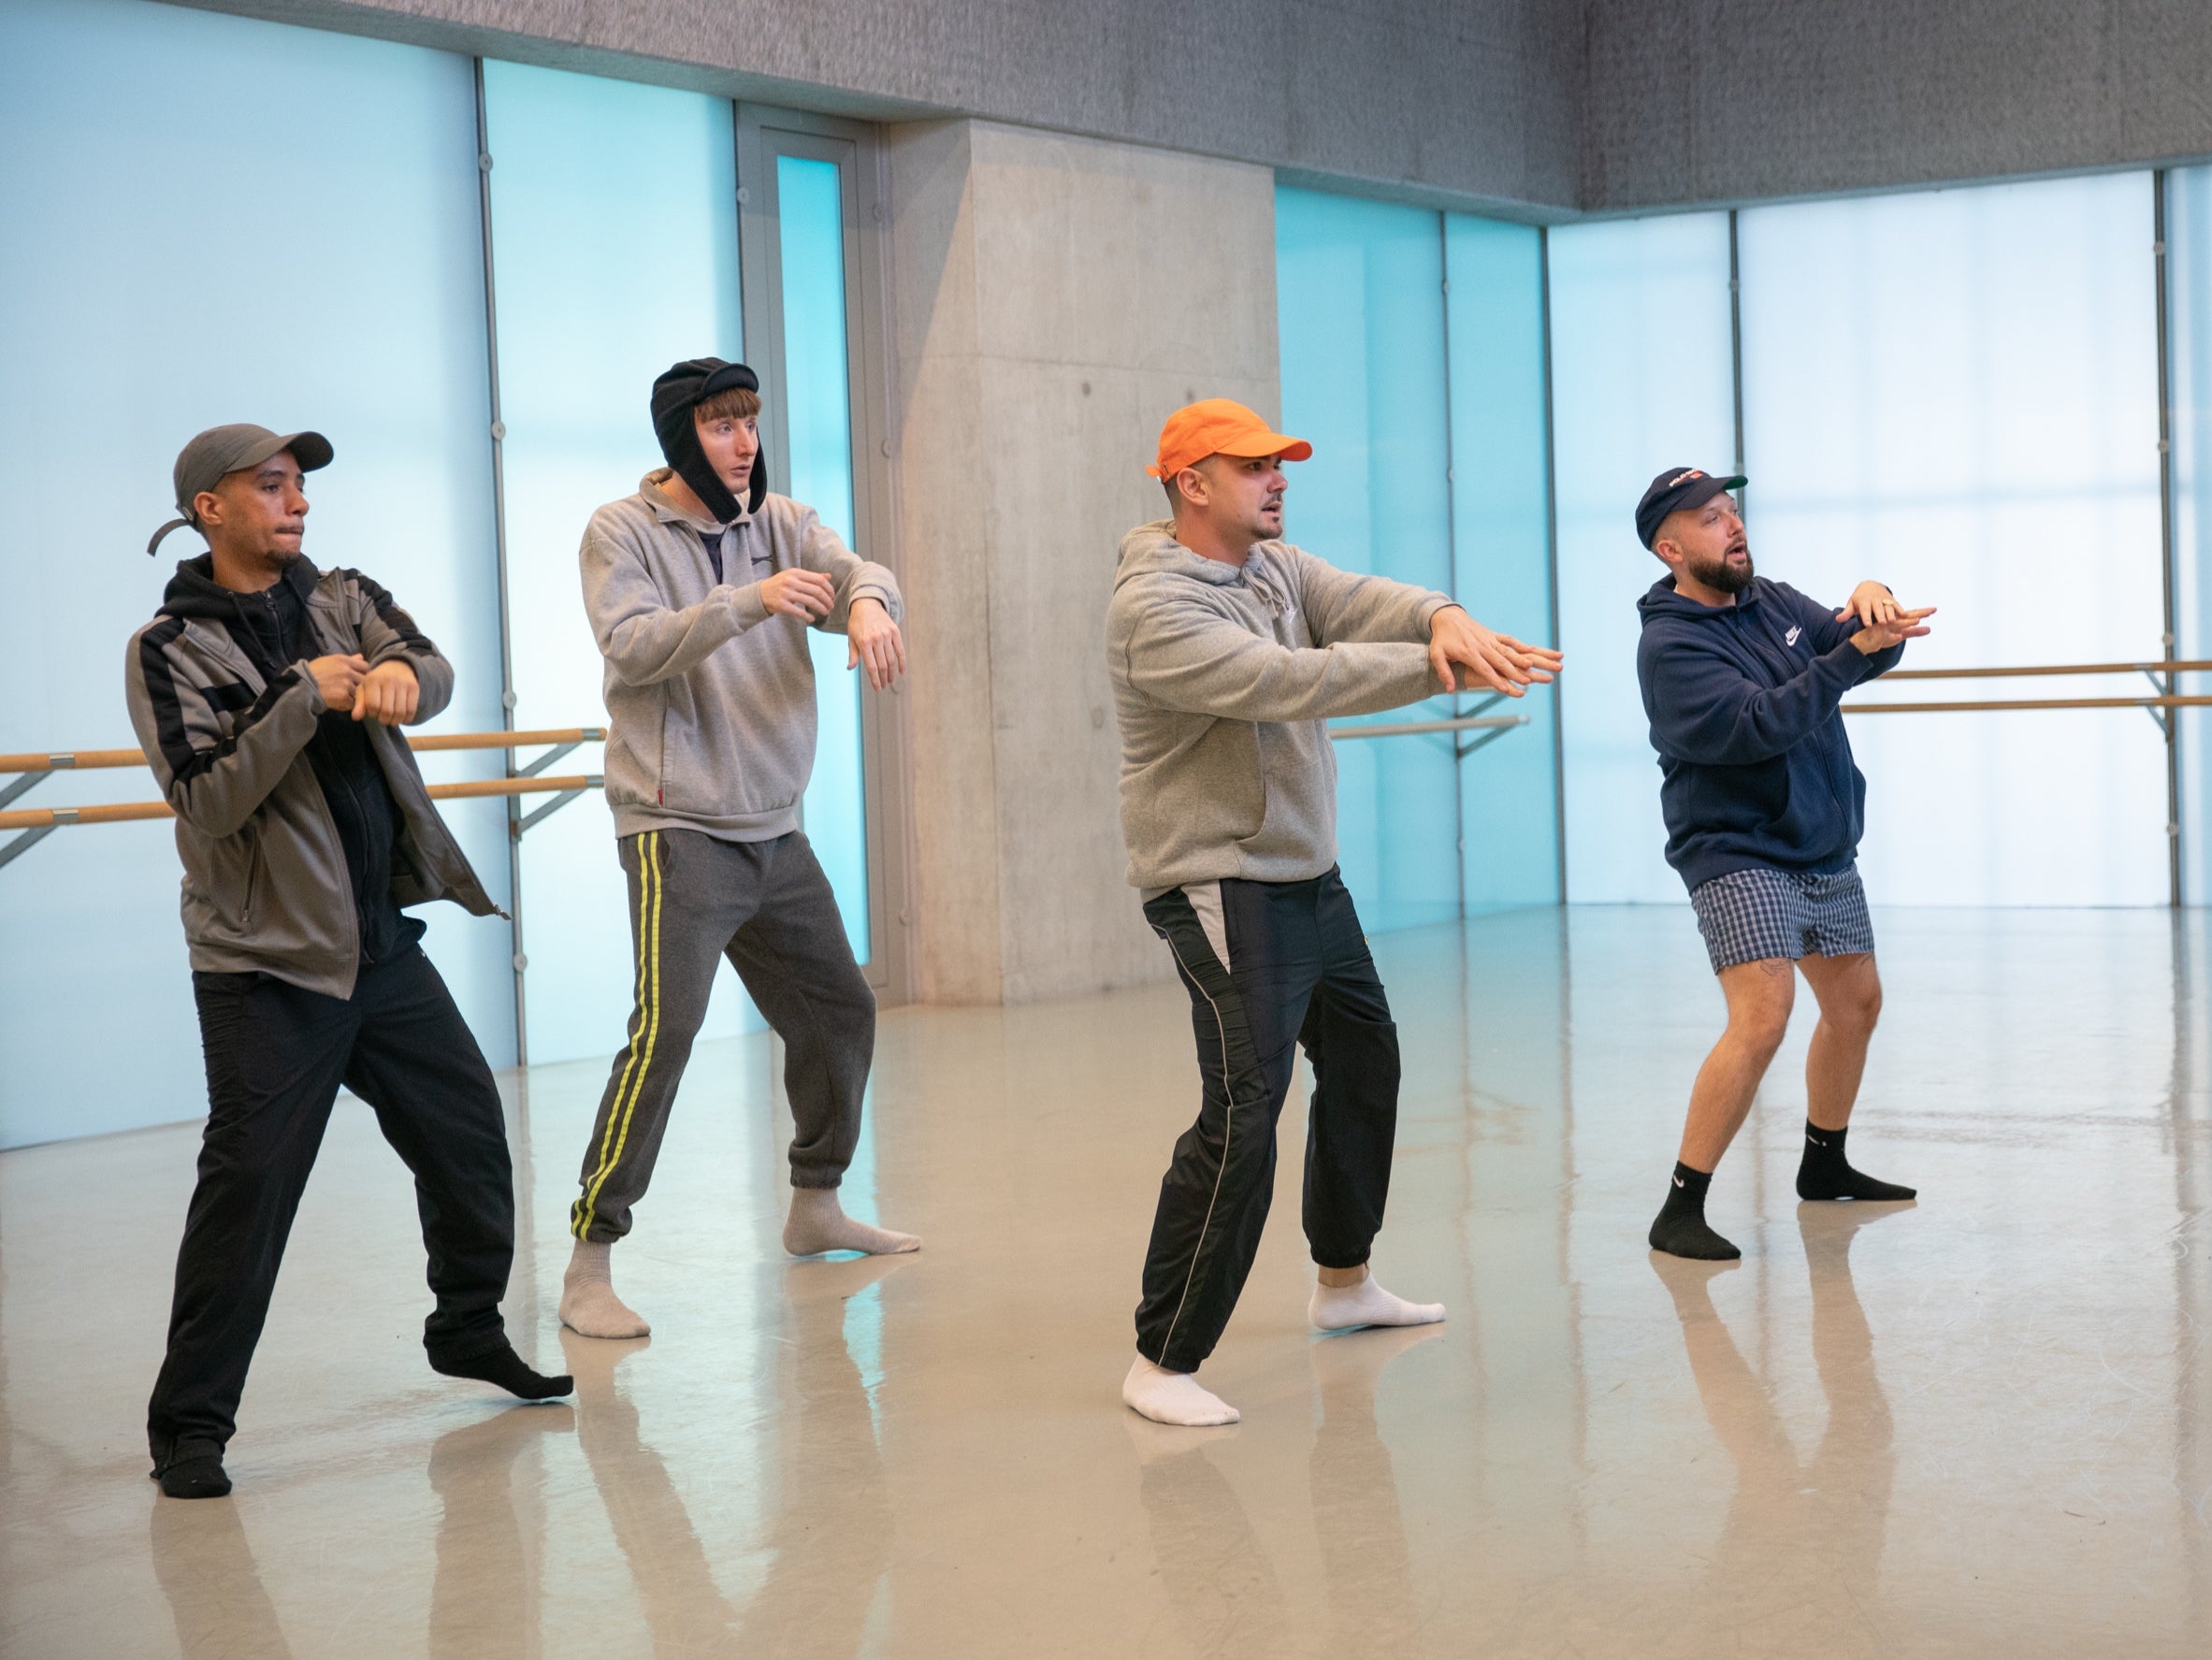 The Kurupt FM gang (freom left, Dan Sylvester, Steve Stamp, Allan Mustafa, Hugo Chegwin) learn a dance routine at the behest of record executives in ‘Big in Japan'